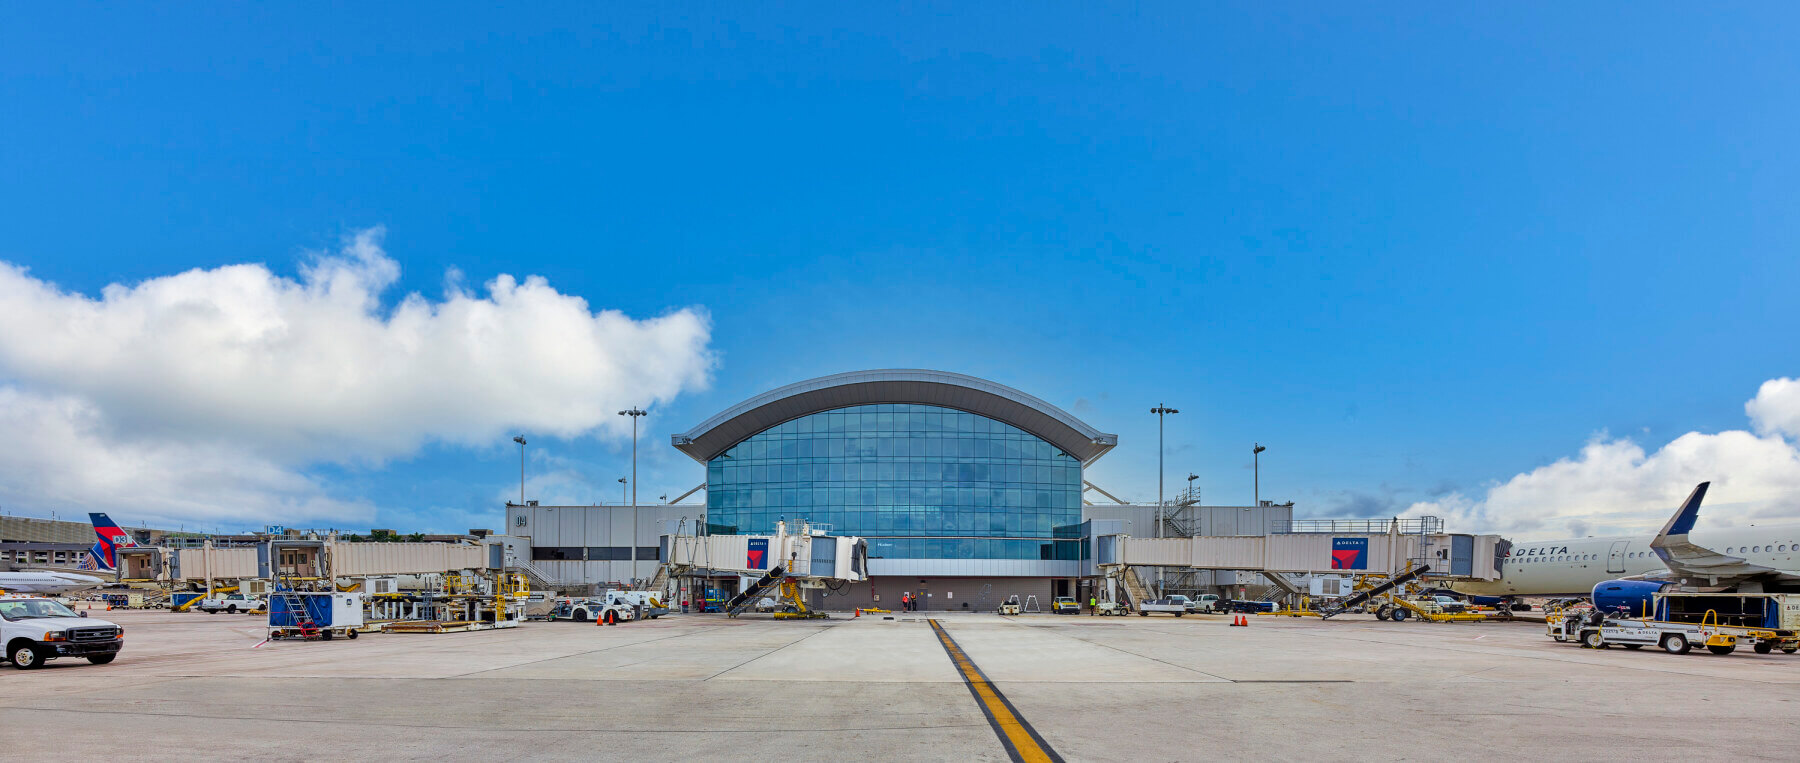 : exterior daytime view of terminal 2 at Fort Lauderdale-Hollywood International Airport